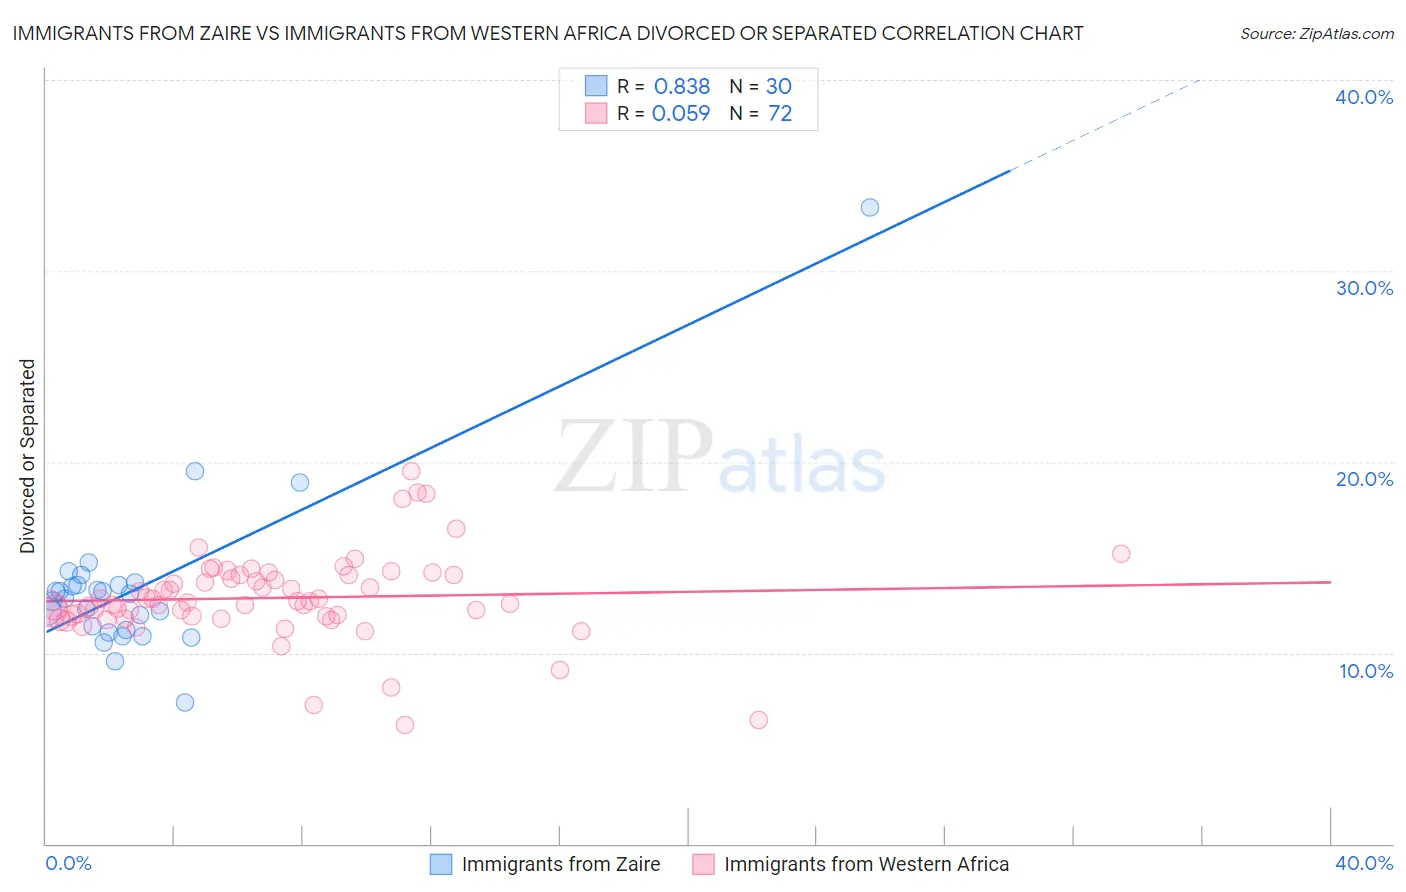 Immigrants from Zaire vs Immigrants from Western Africa Divorced or Separated